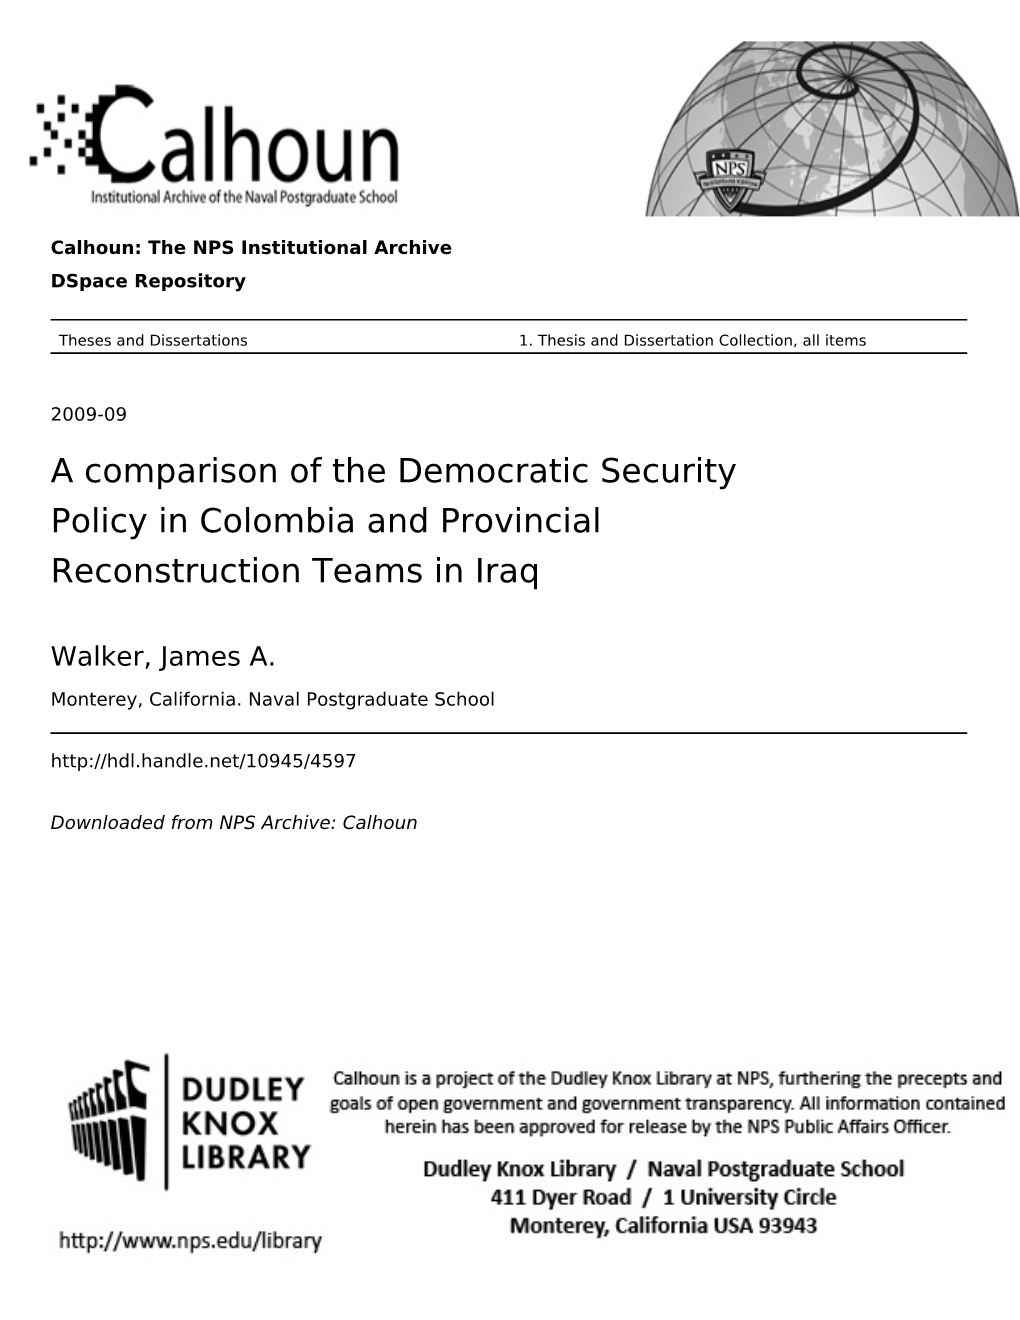 A Comparison of the Democratic Security Policy in Colombia and Provincial Reconstruction Teams in Iraq